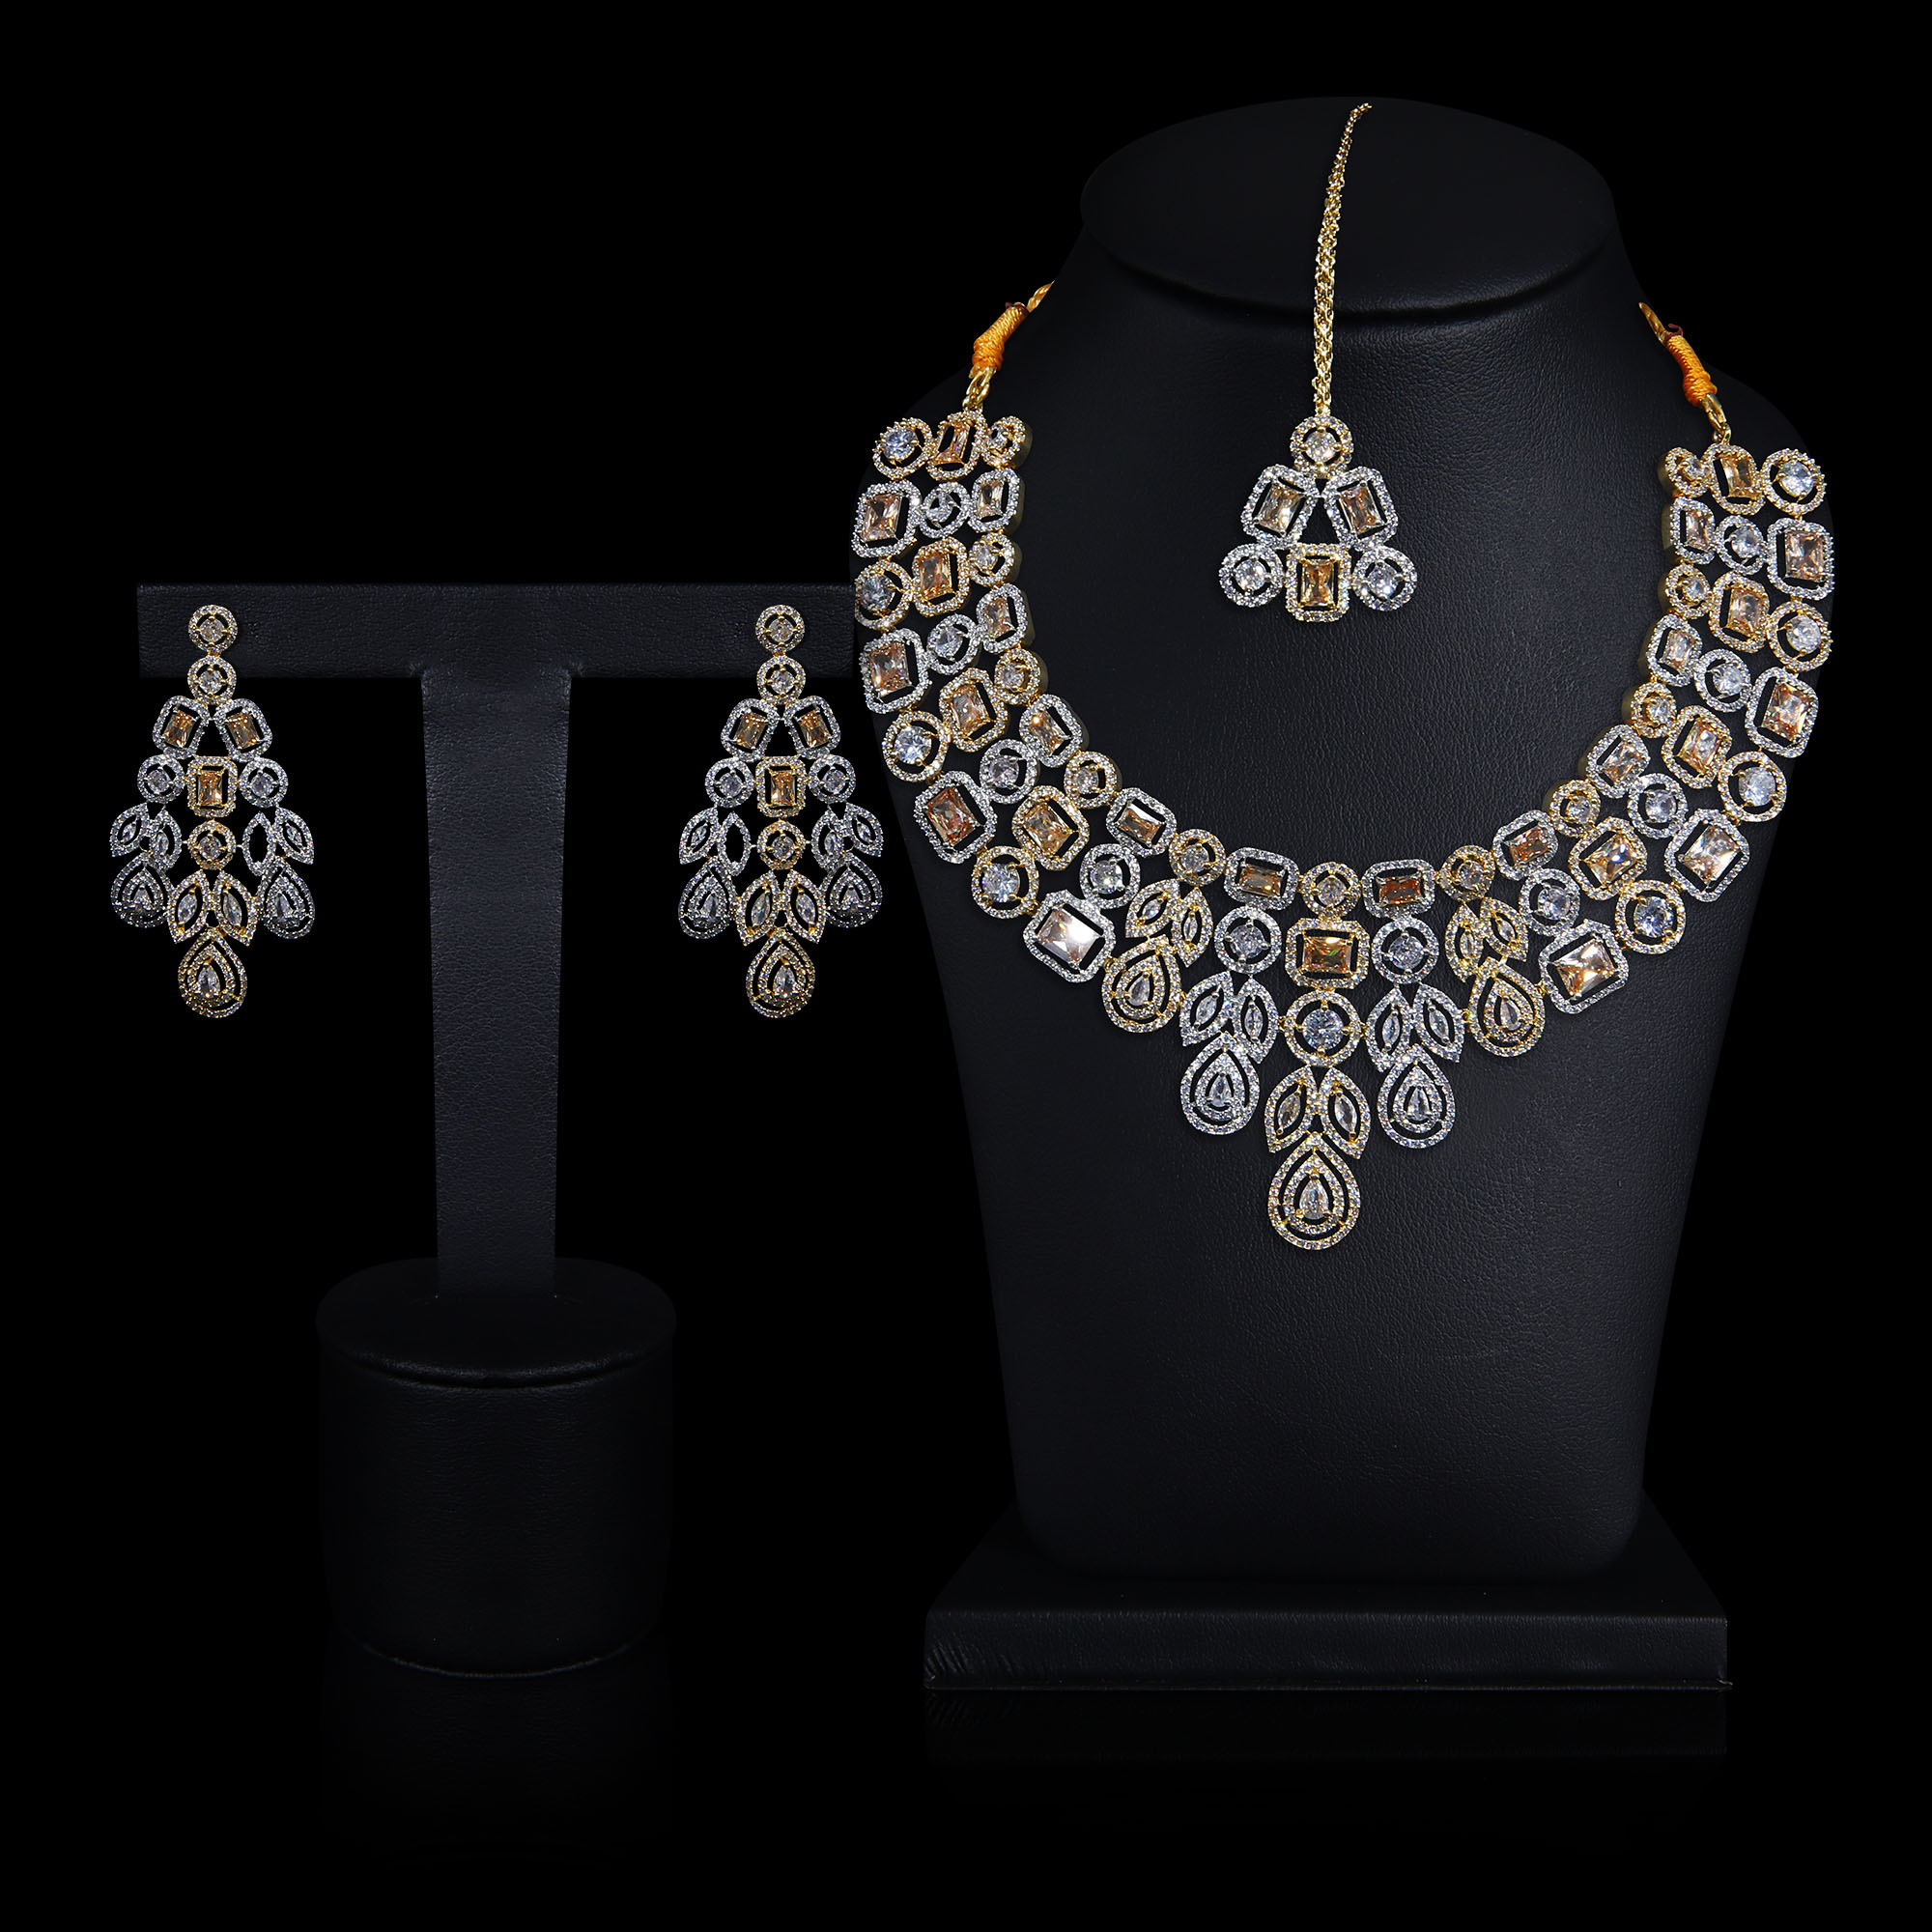 A diamond necklace and dimaond earring display on dummy